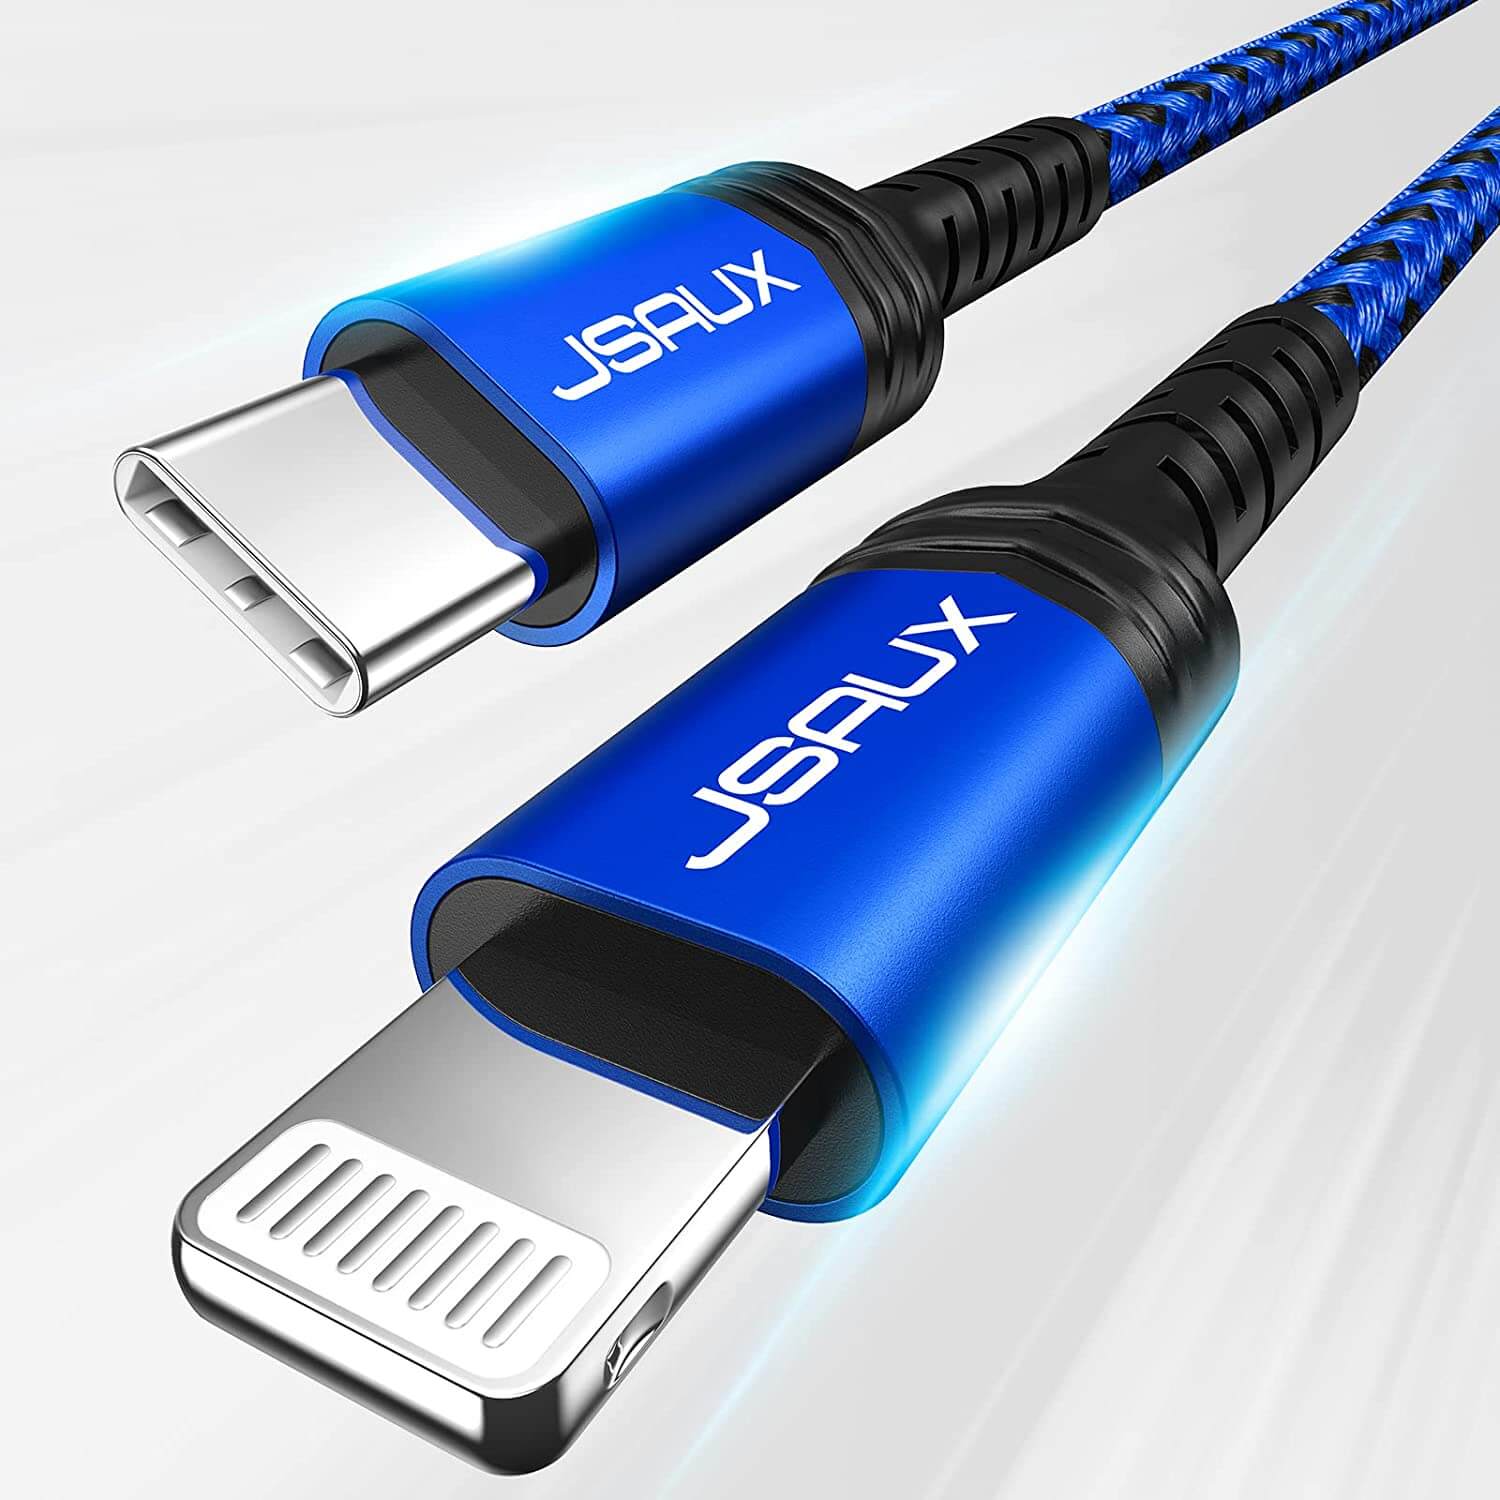 mfi_usb-c_to_lightning_cable #color_blue